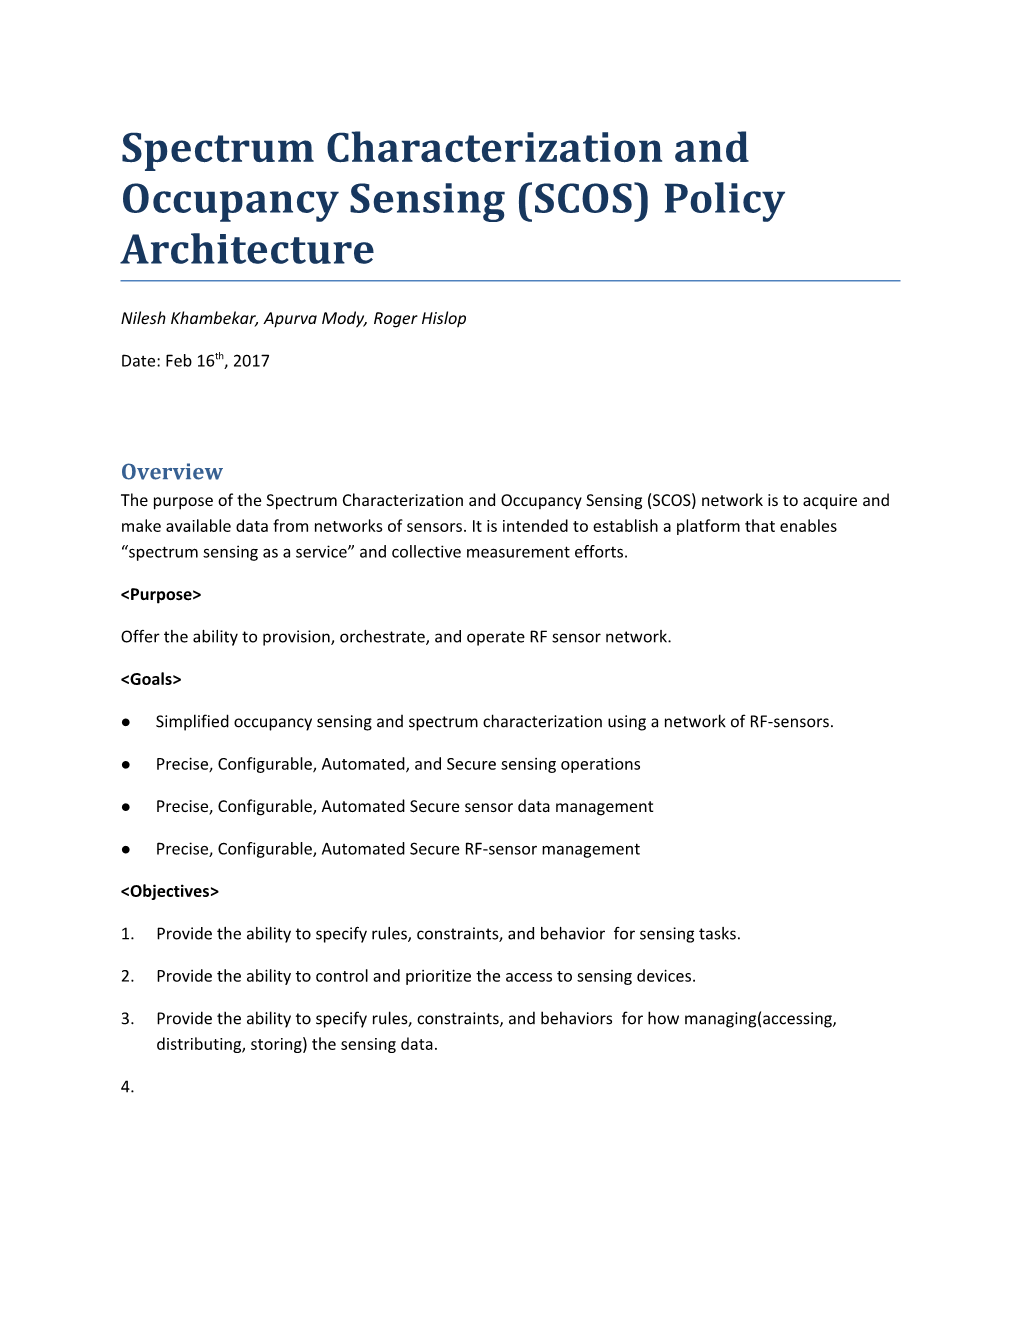 Protocol to Access X000b Spectrum Characterization and Occupancy Sensing (SCOS) Network